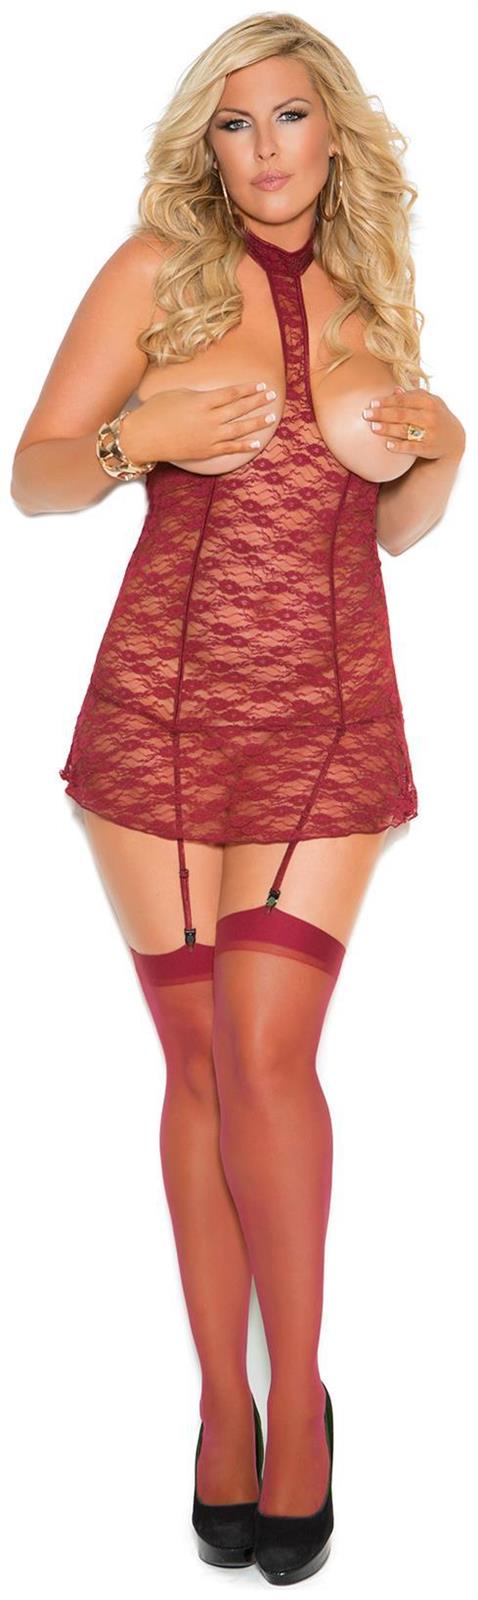 Elegant Moments Women's Open bust lace chemise - Burgundy - 2X for Valentines Day